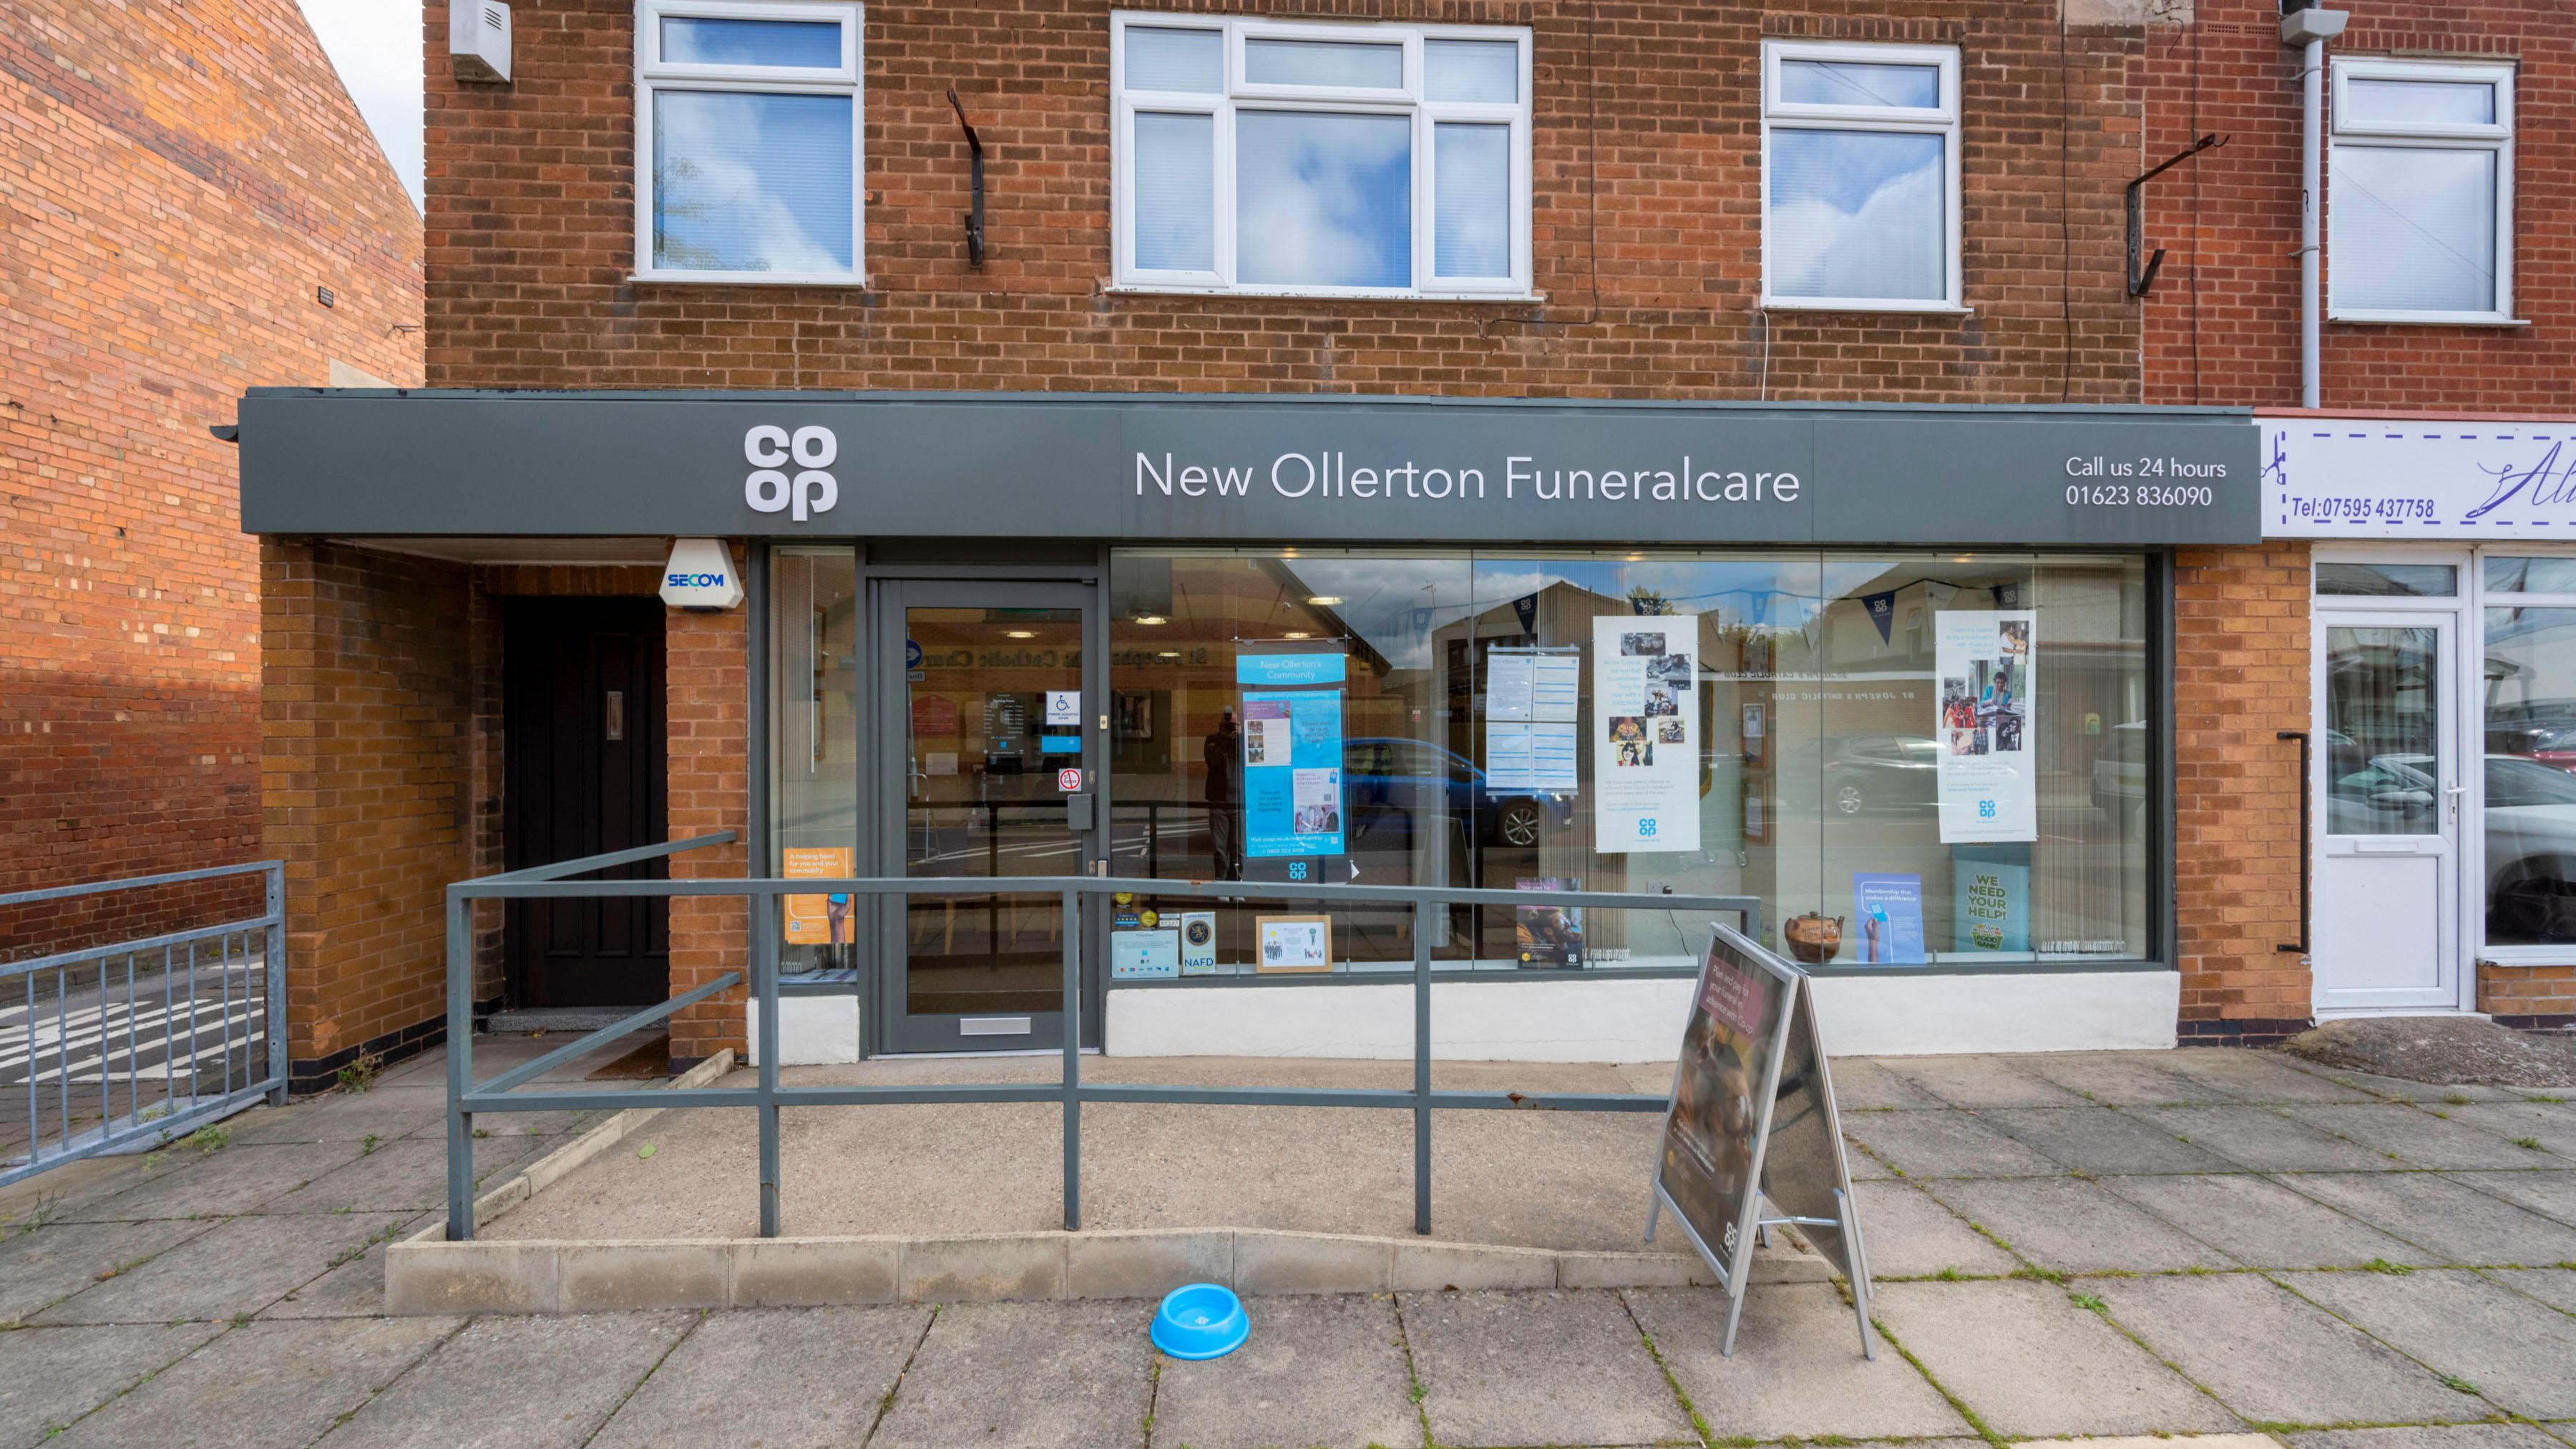 Images New Ollerton Funeralcare